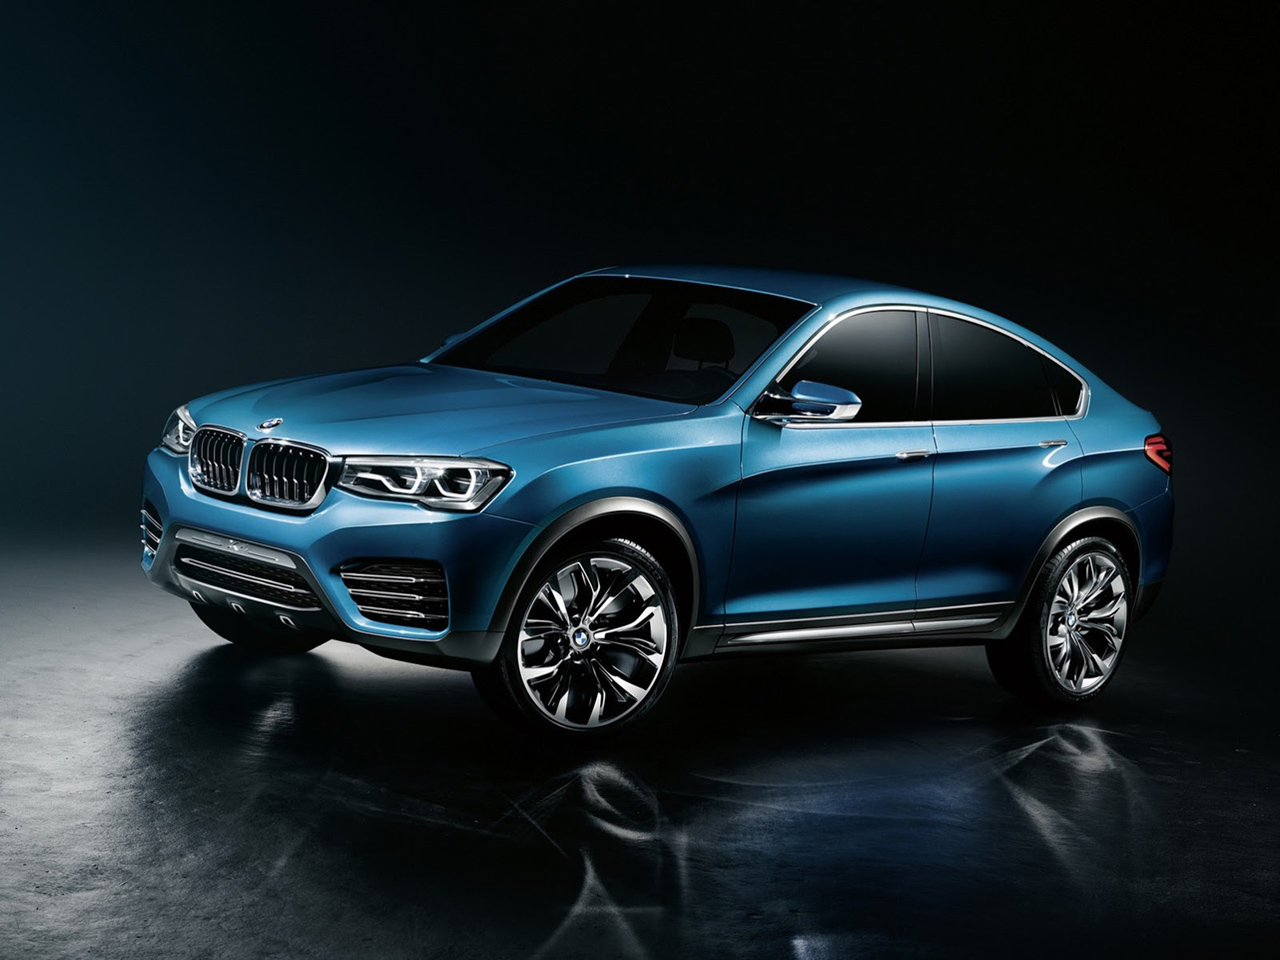 001-bmw-x4-concept-leaked-images